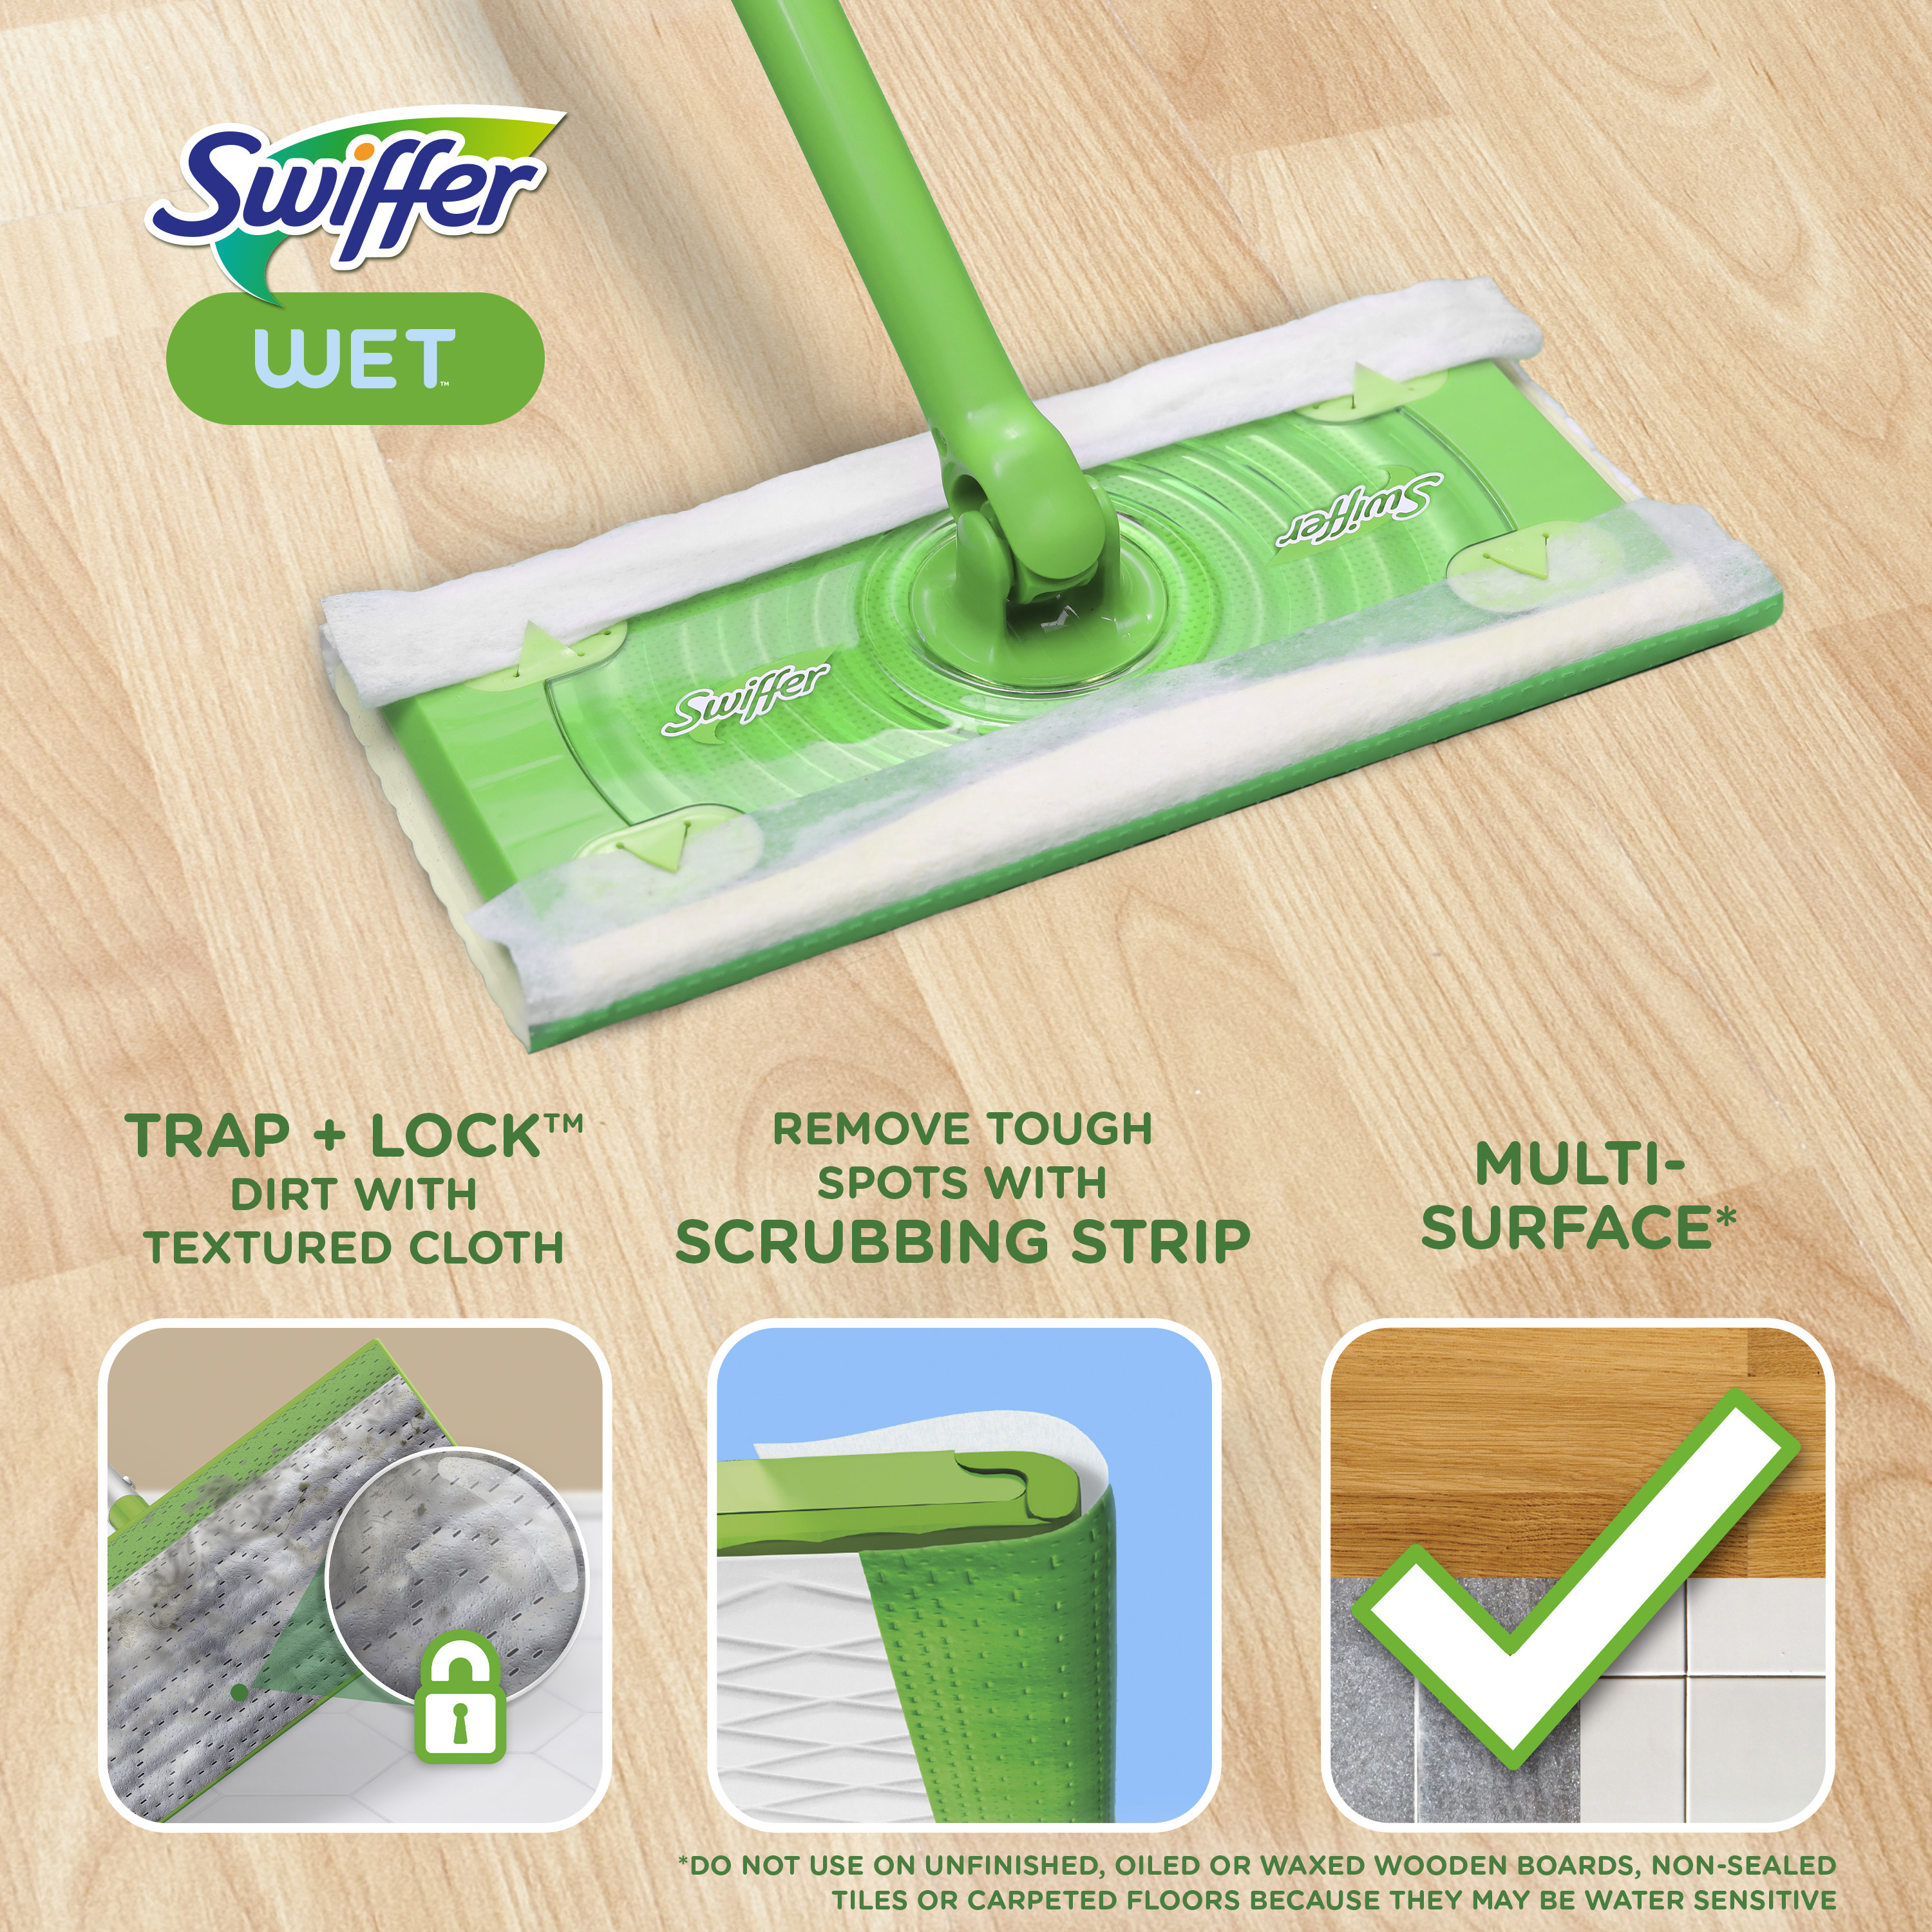 Swiffer Sweeper Wet Mopping Cloths, Multi-Surface Floor Cleaner, Fresh Scent, 24 Count - image 4 of 16